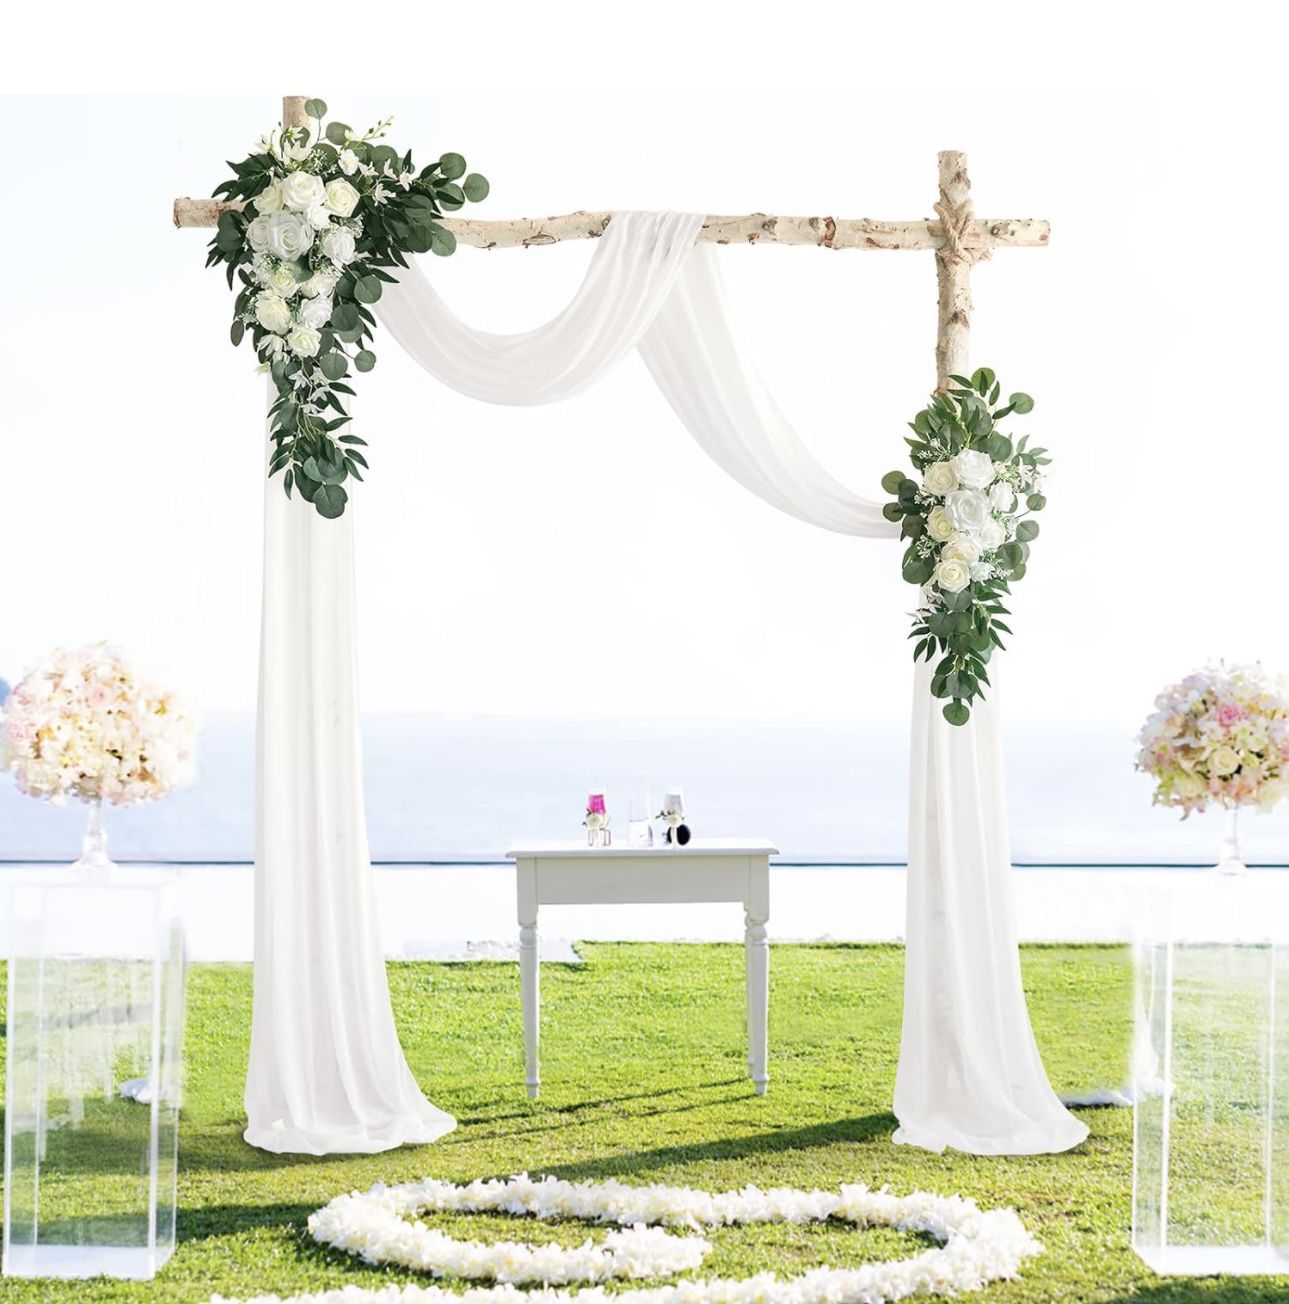 Artificial Wedding Arch Flowers Kit(Pack of 3), with 26Ft White Color Wedding Arch Draping Fabric, Wedding Flowers for Ceremony and Reception Backdrop